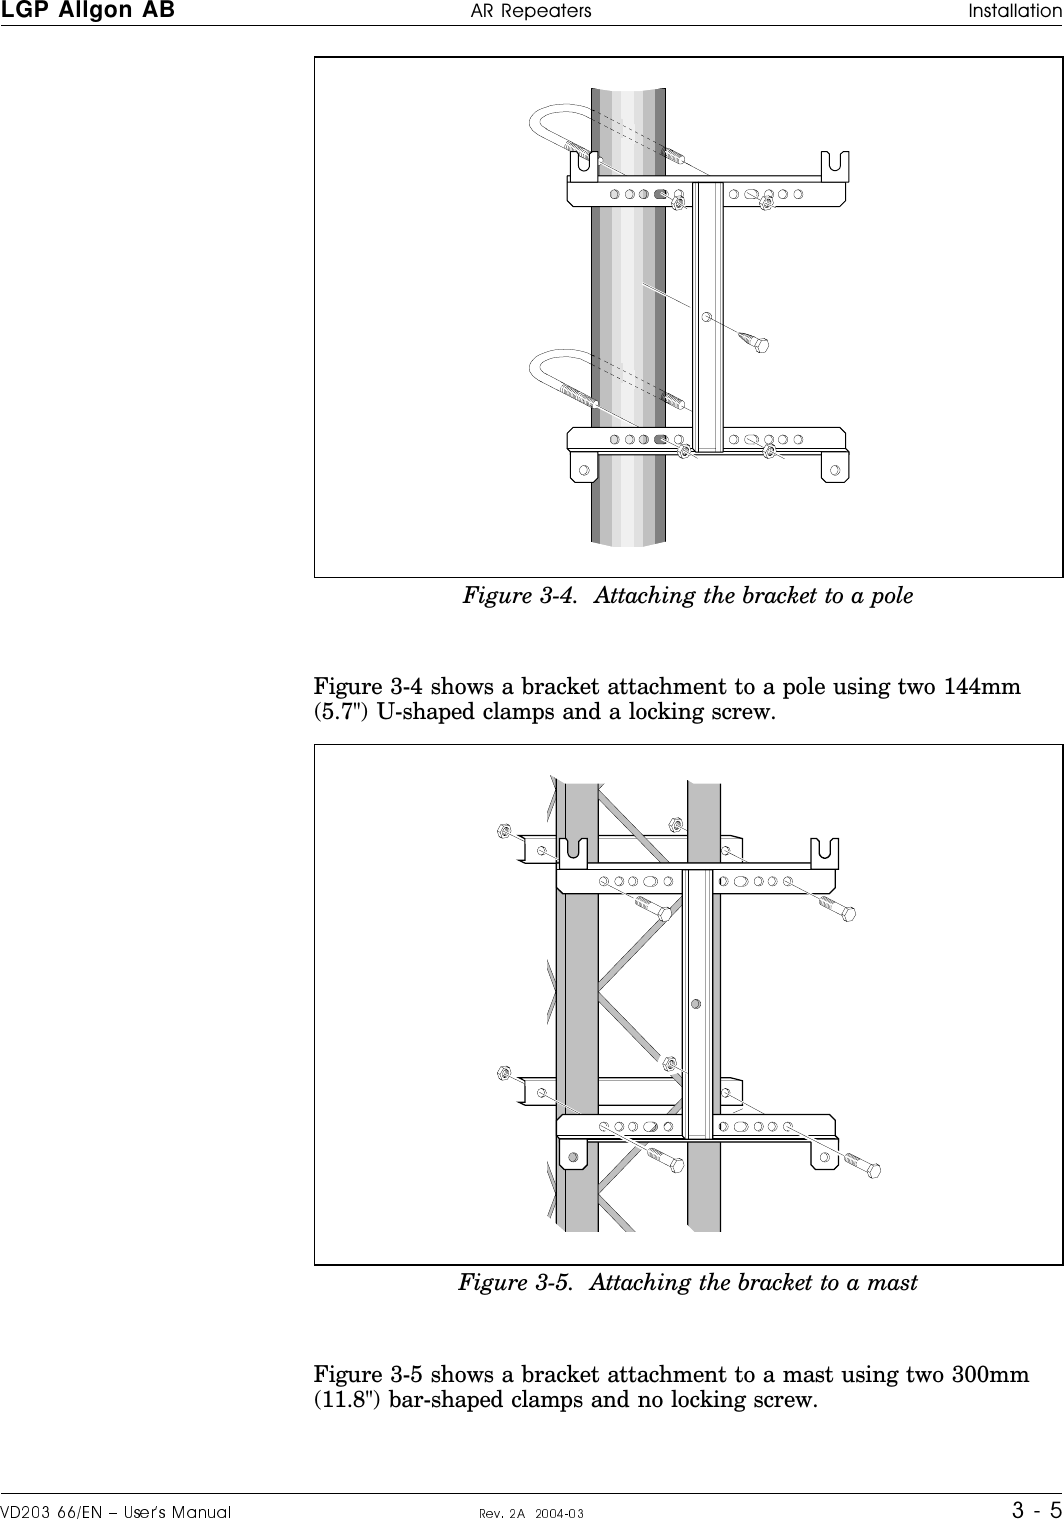  Figure 3-4 shows a bracket attachment to a pole using two 144mm(5.7&quot;) U-shaped clamps and a locking screw.Figure 3-5 shows a bracket attachment to a mast using two 300mm(11.8&quot;) bar-shaped clamps and no locking screw.Figure 3-4.  Attaching the bracket to a poleFigure 3-5.  Attaching the bracket to a mastLGP Allgon AB H|H#H o#ff#croaS